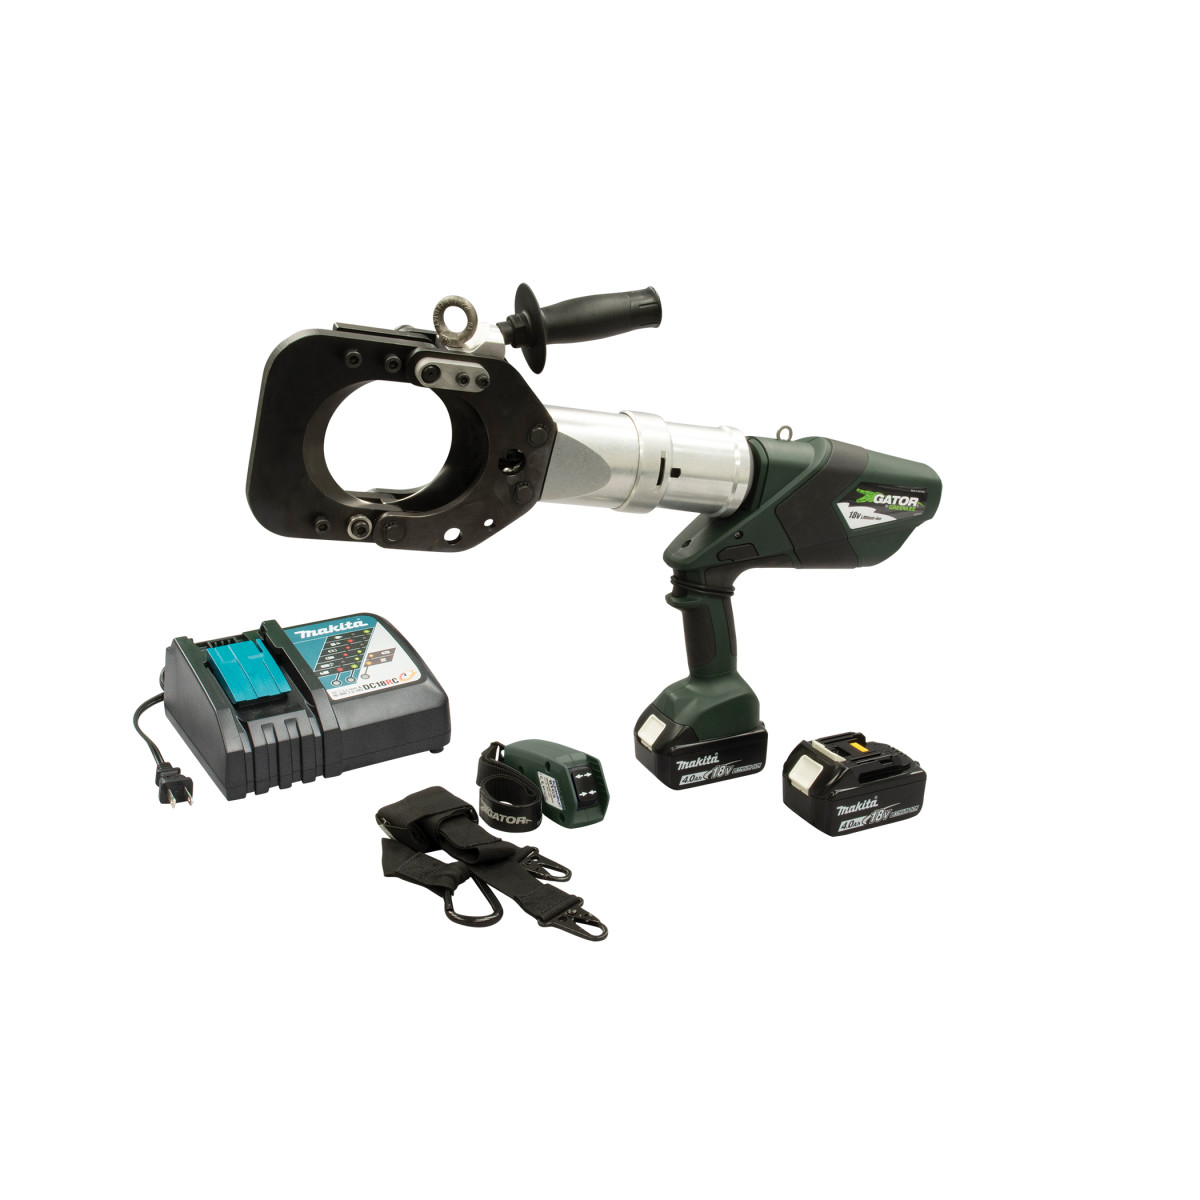 Remote control cable cutter with end position blade recognition.  Can be used in either hand held or remote configuration.  Tool comes standard with remote control (BTC3GL), rigging harness (BTC3-LH).  120v Makita charger and two 4.0Ah batteries.  Hard side metal case